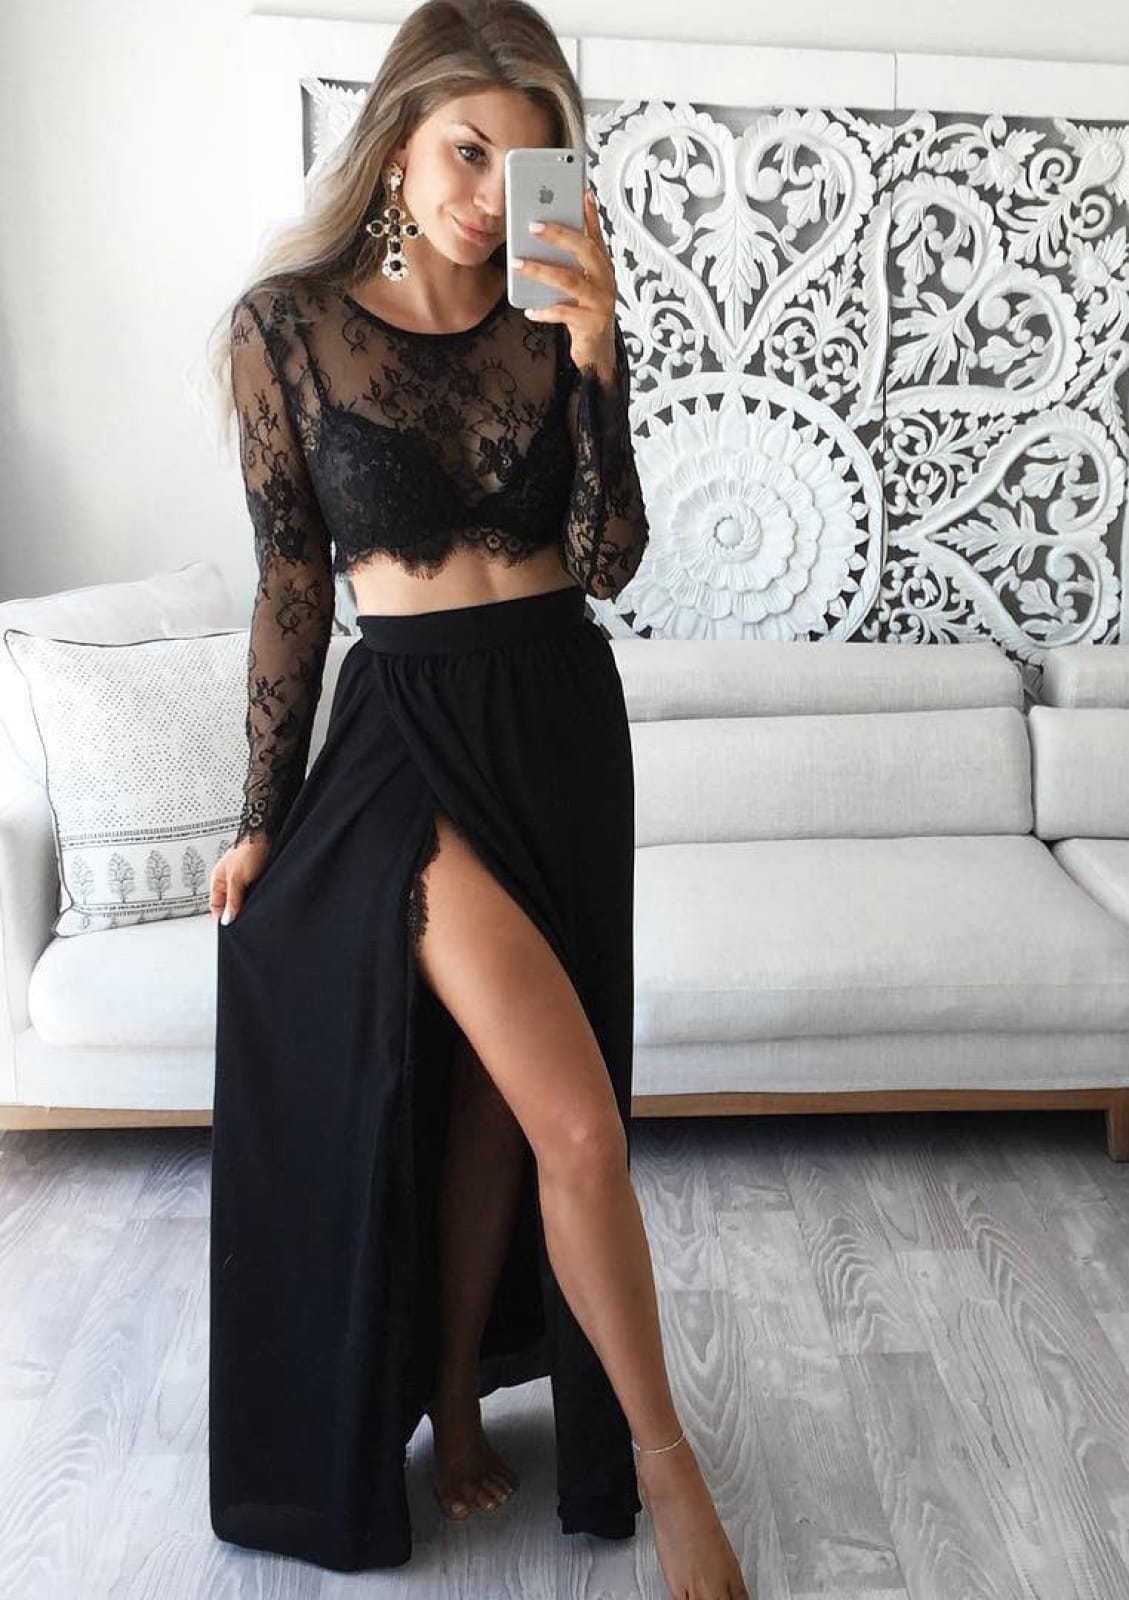 Floral Illusion: Crop top with matching high waist full skirt